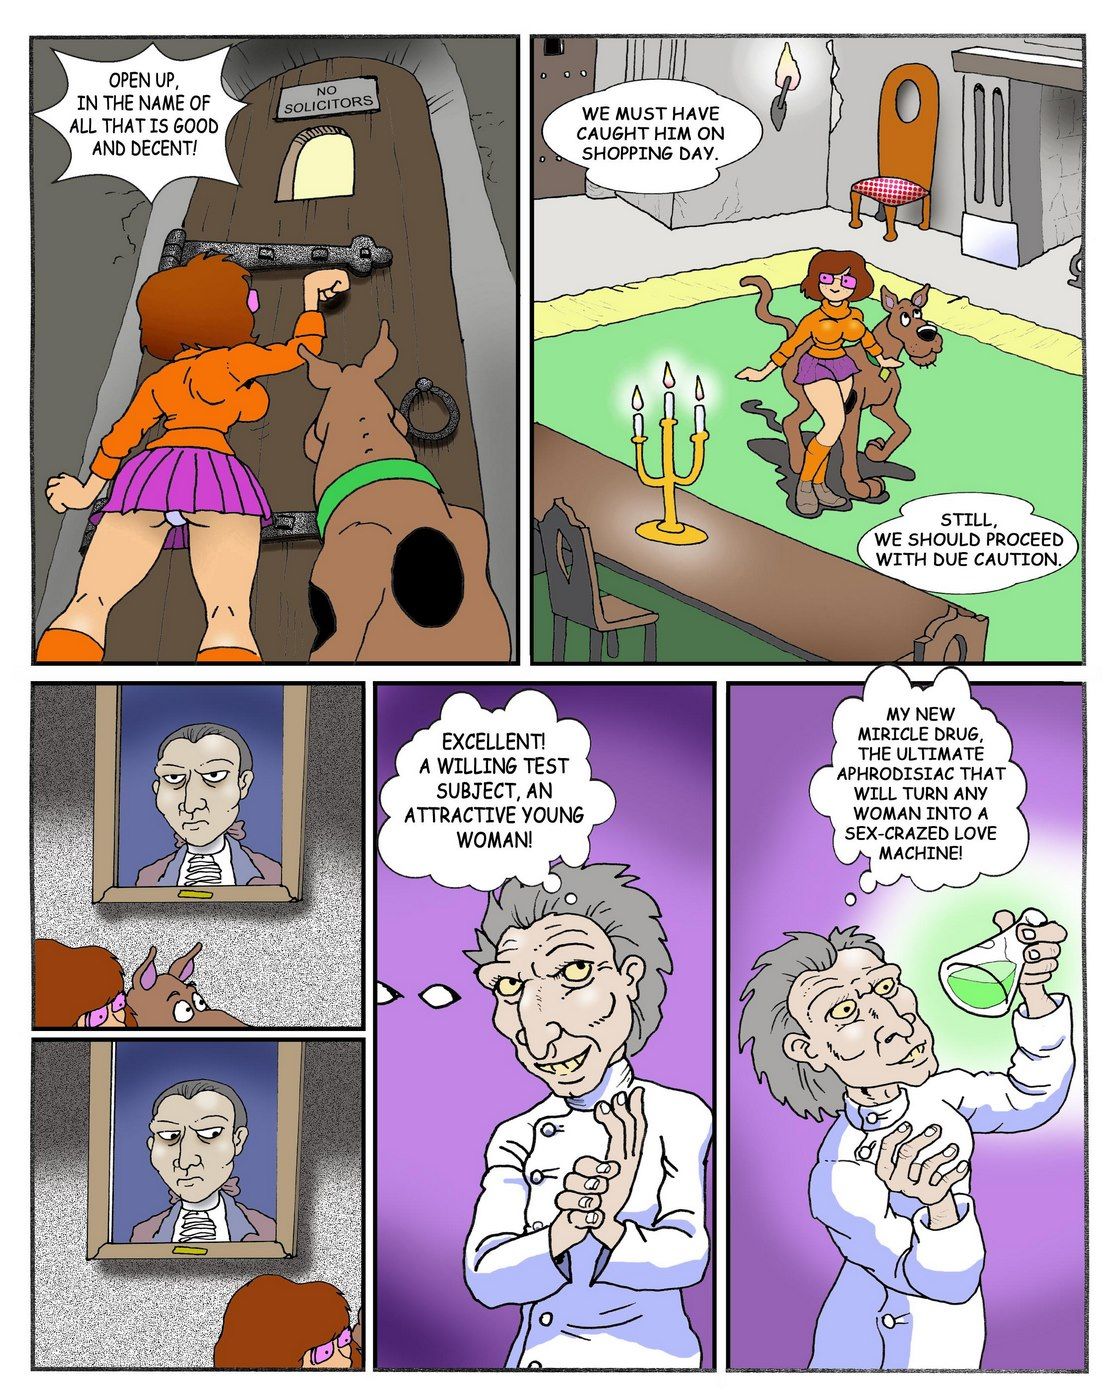 Mystery of the Sexual Weapon (Scooby-Doo) page 3